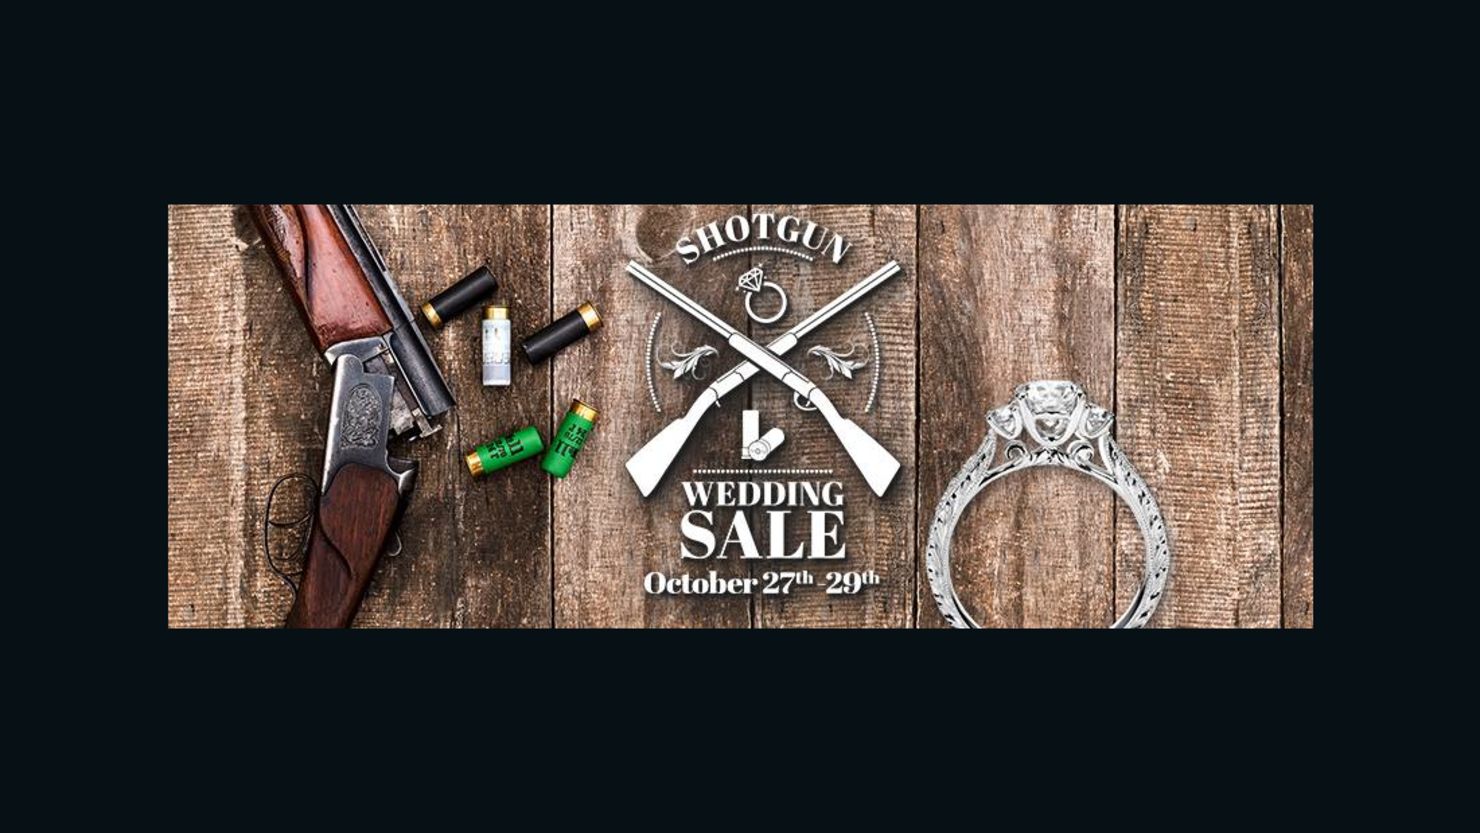 Just bought that ring and want your gun? Not a problem.